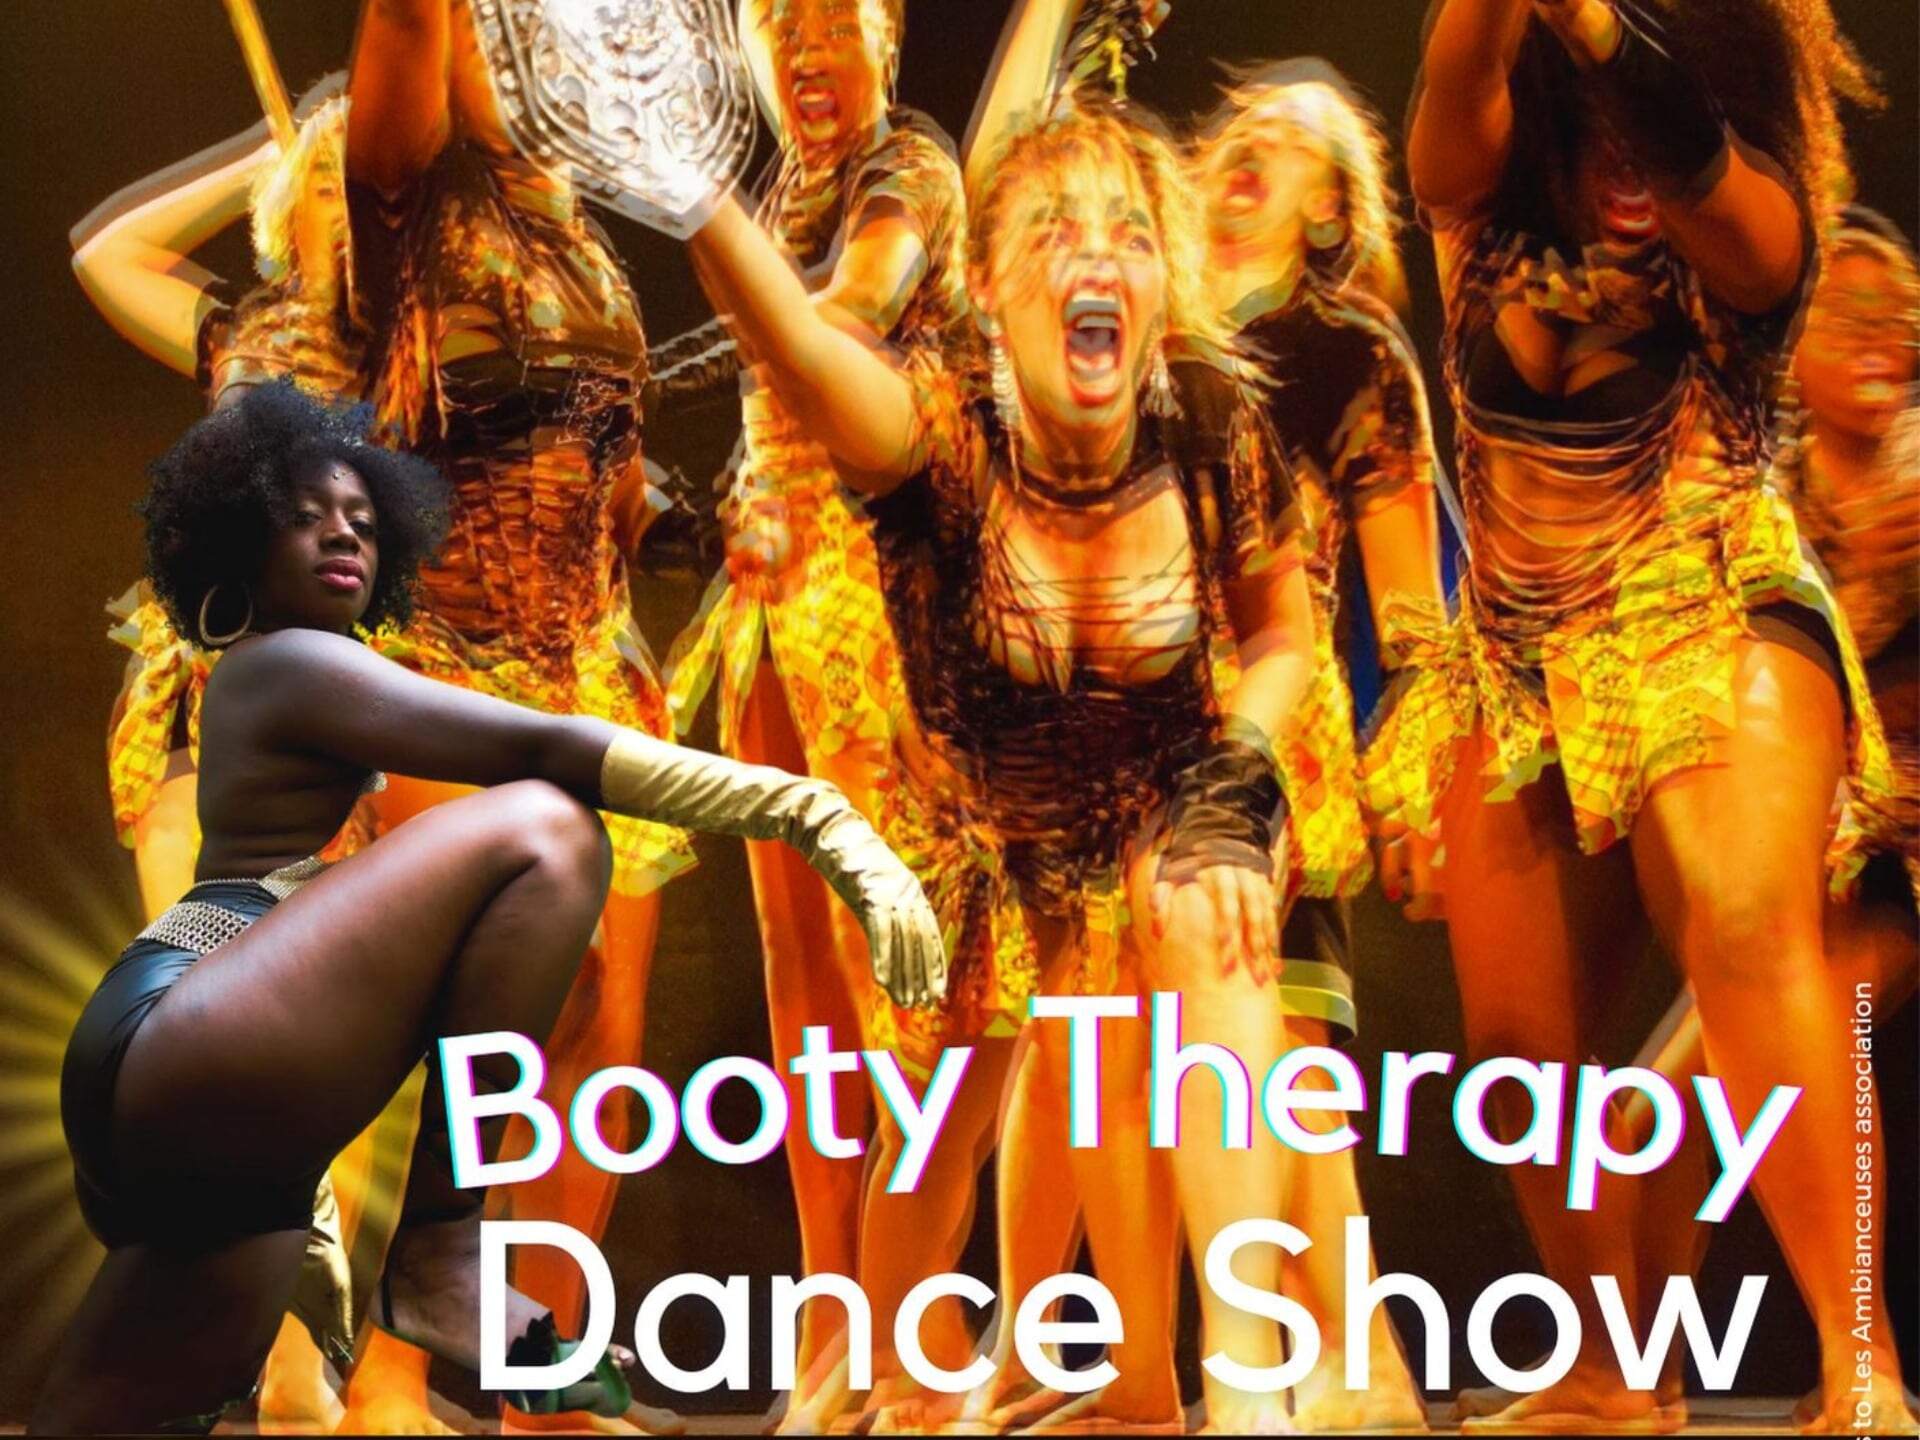 Booty Therapy Dance Show with Bootykilleuses & Guests